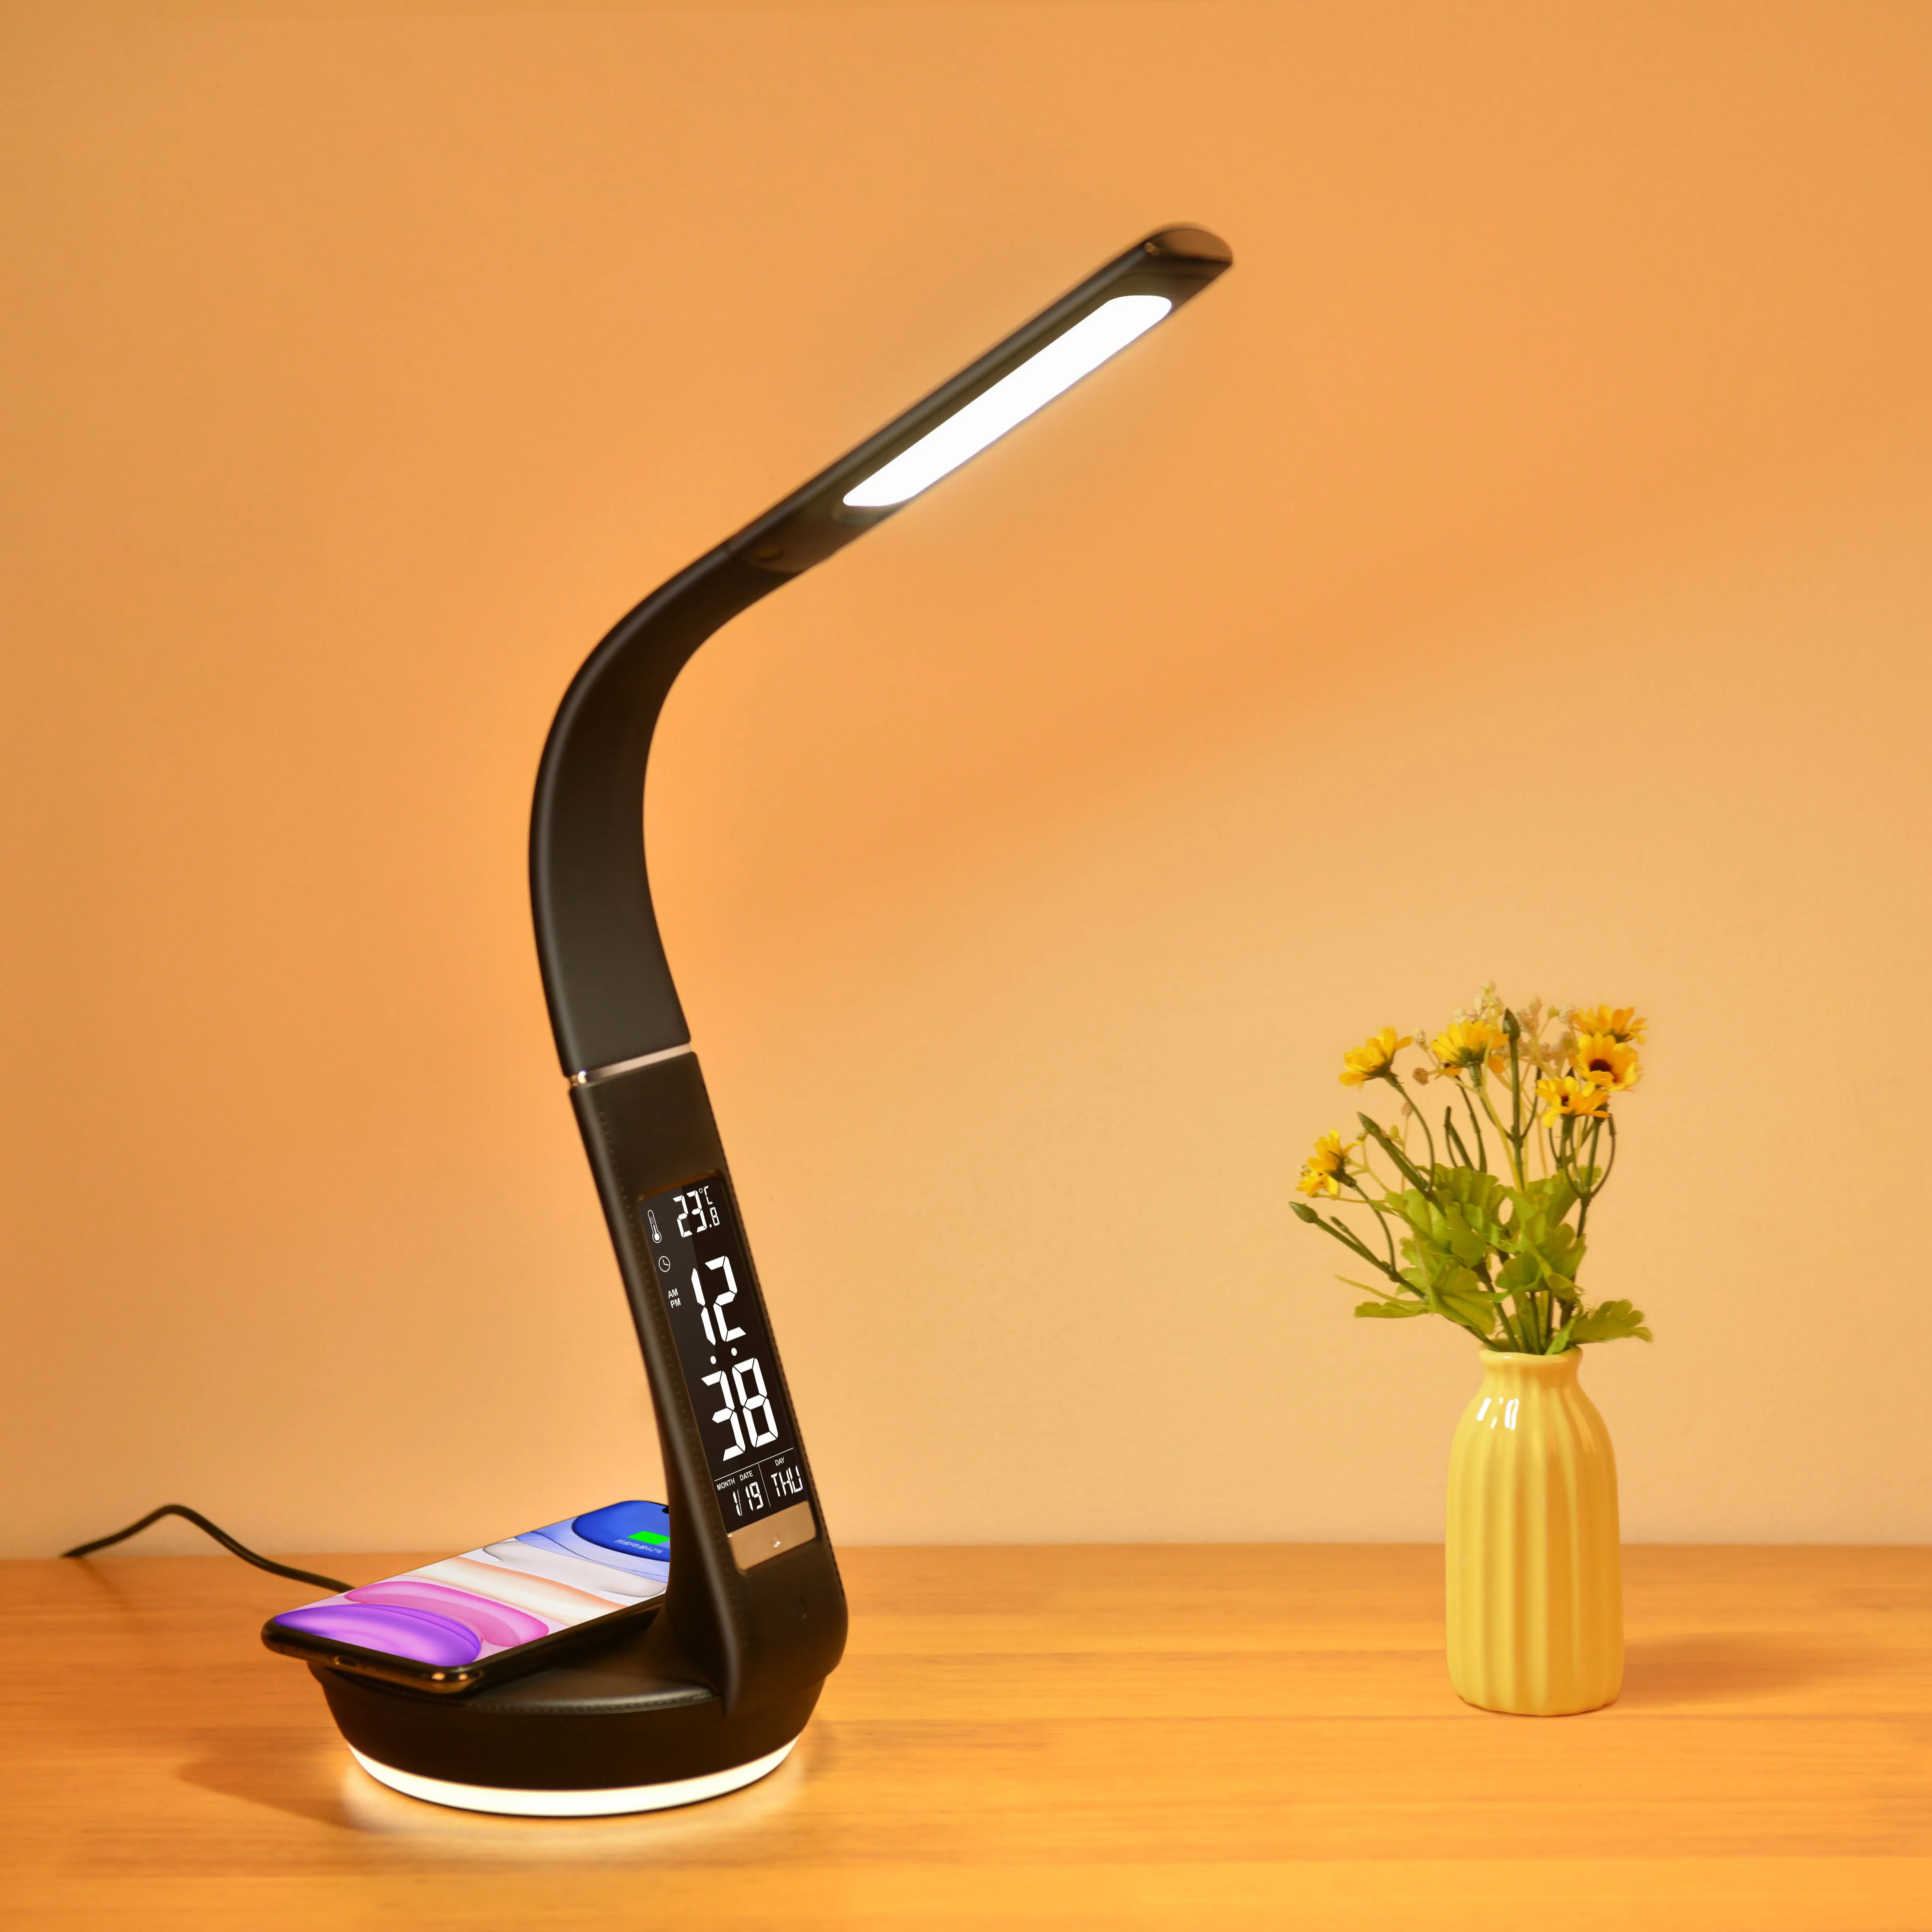 Lamp Home Decor Flexible Arm Wireless Charger Table Lamp with LCD Display LED Desk Lamp smart home lights